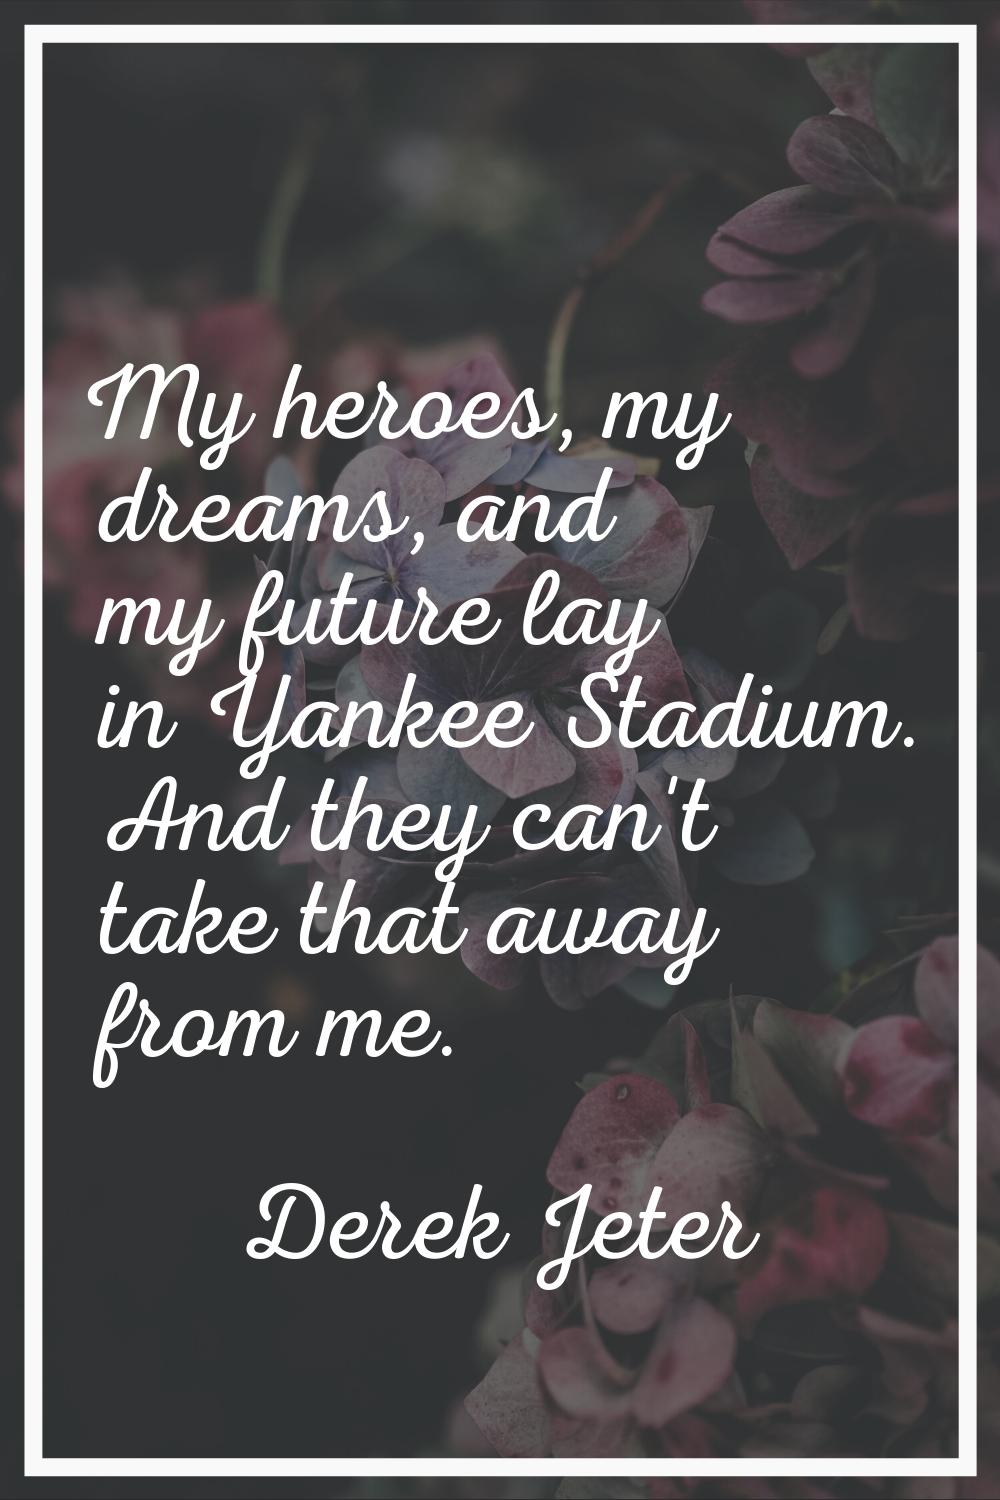 My heroes, my dreams, and my future lay in Yankee Stadium. And they can't take that away from me.